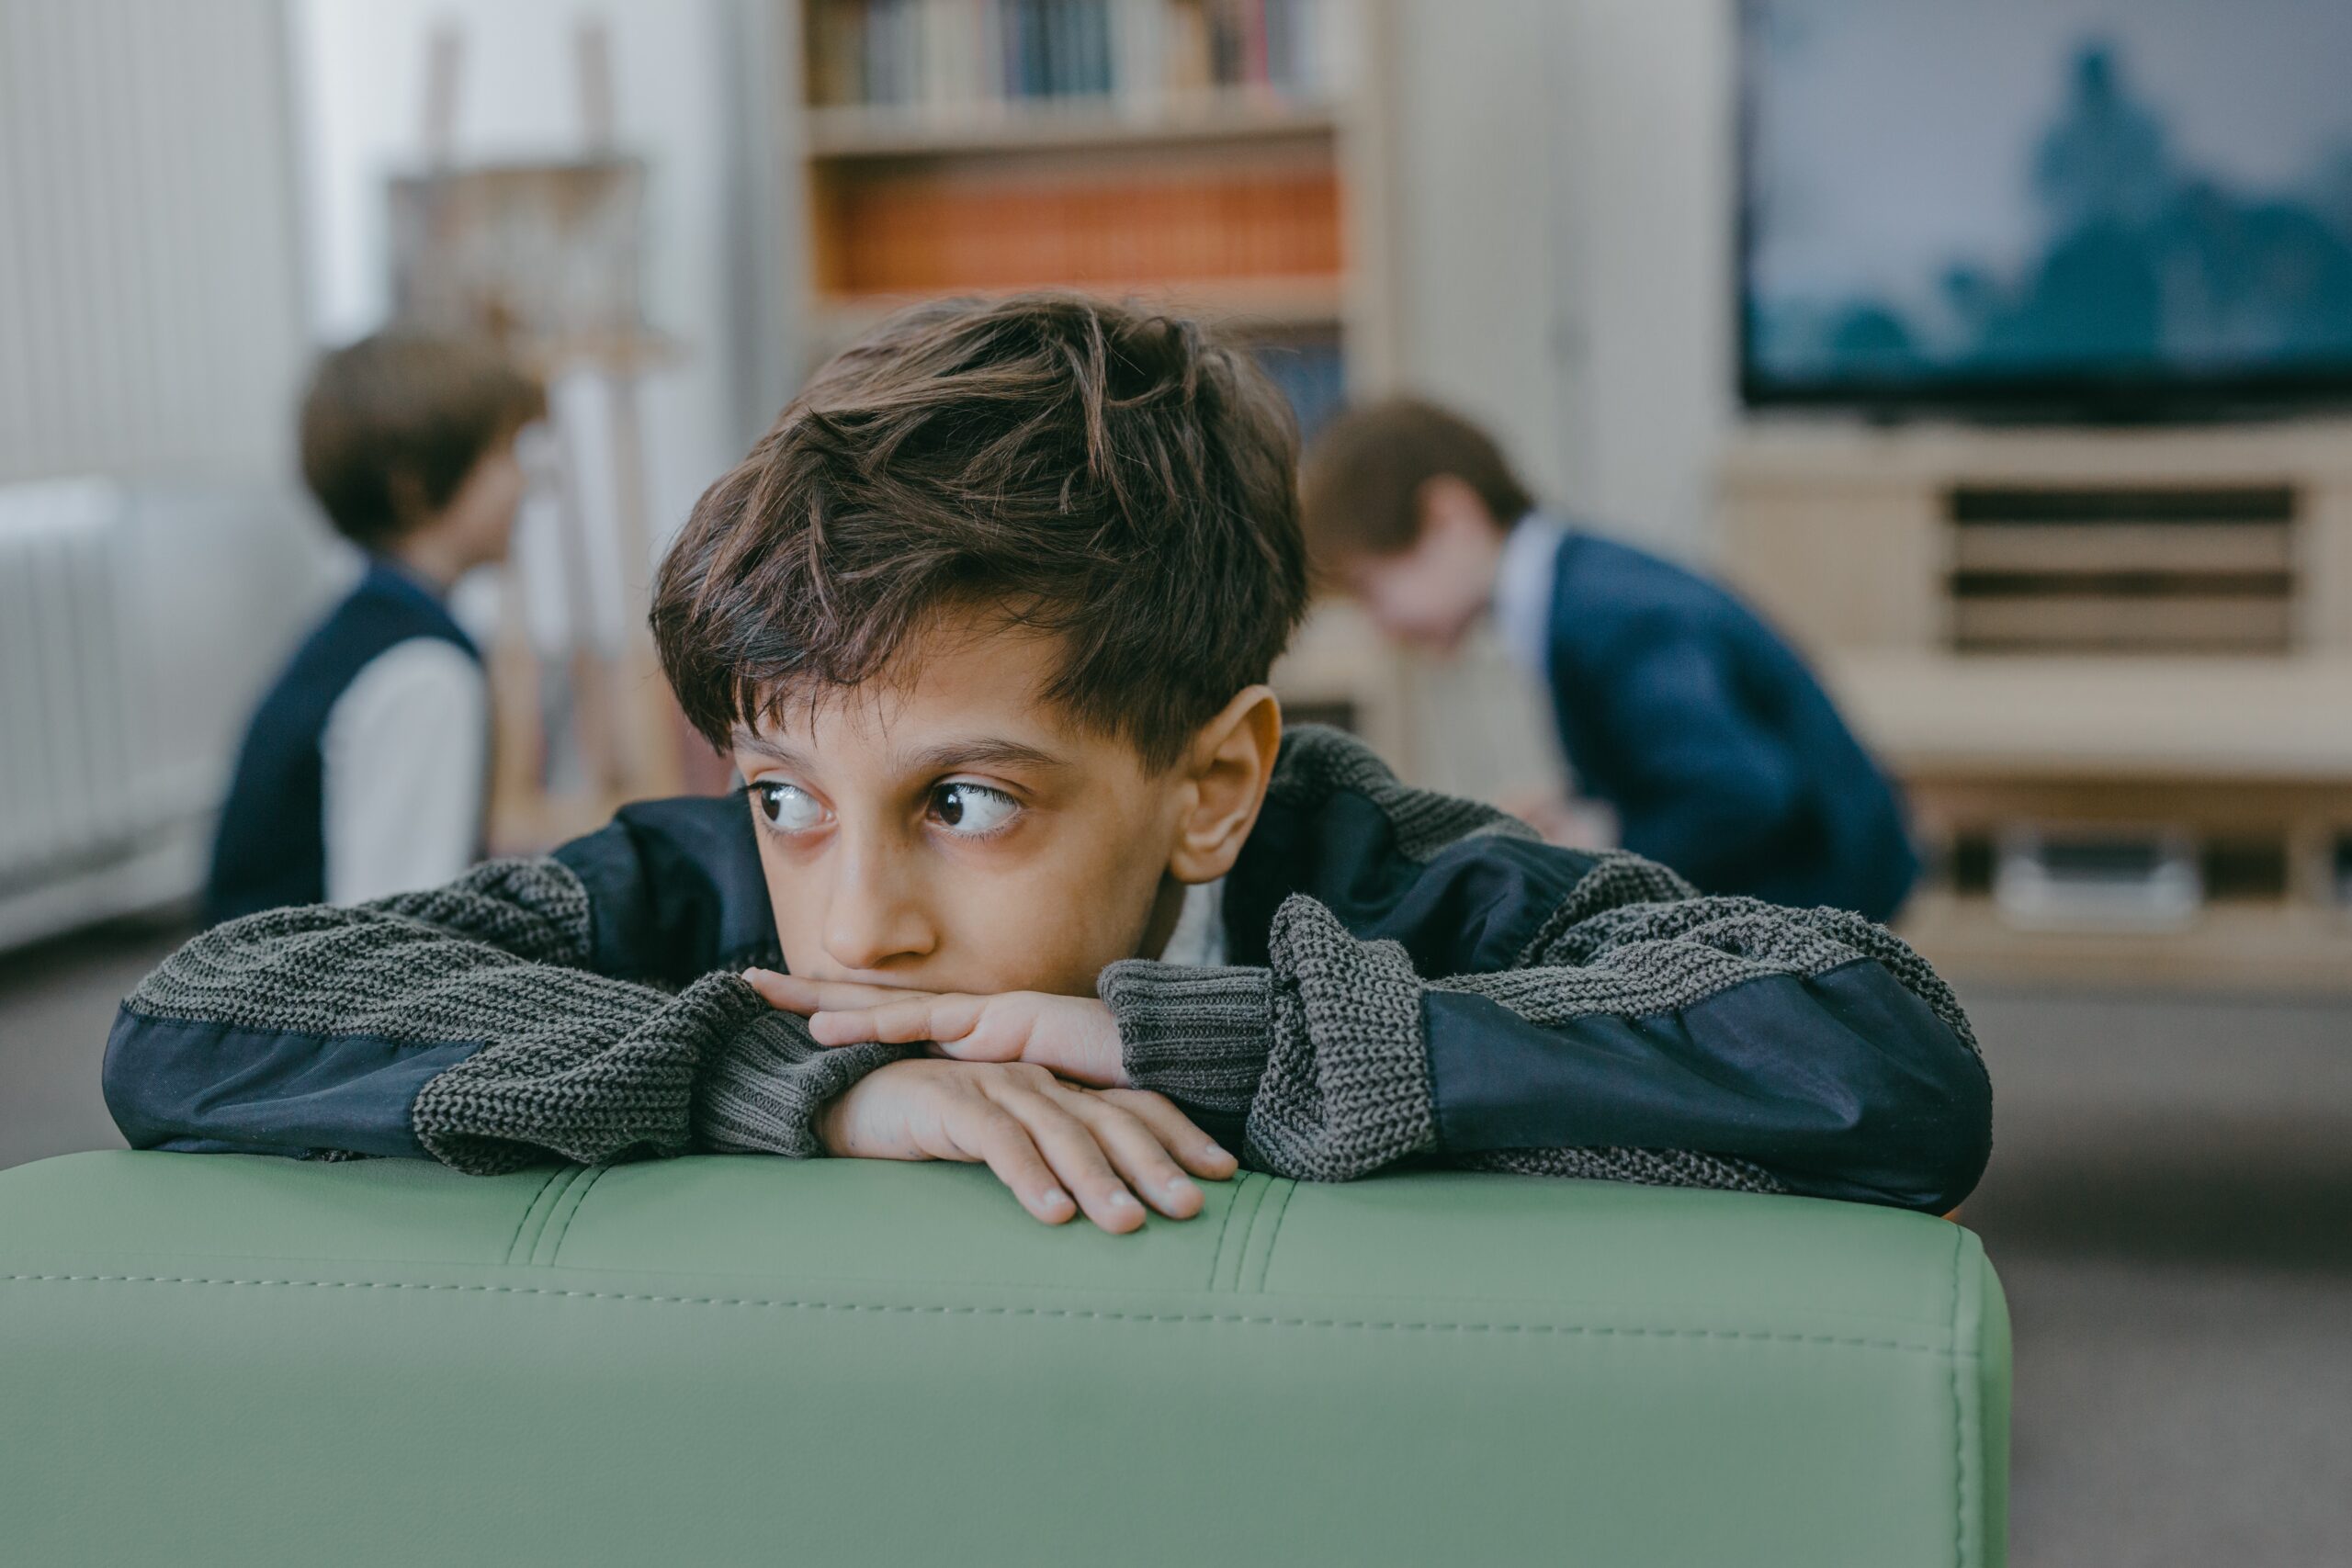 Early Signs of Bullying in Under 10’s: A Guide for Teachers & Parents